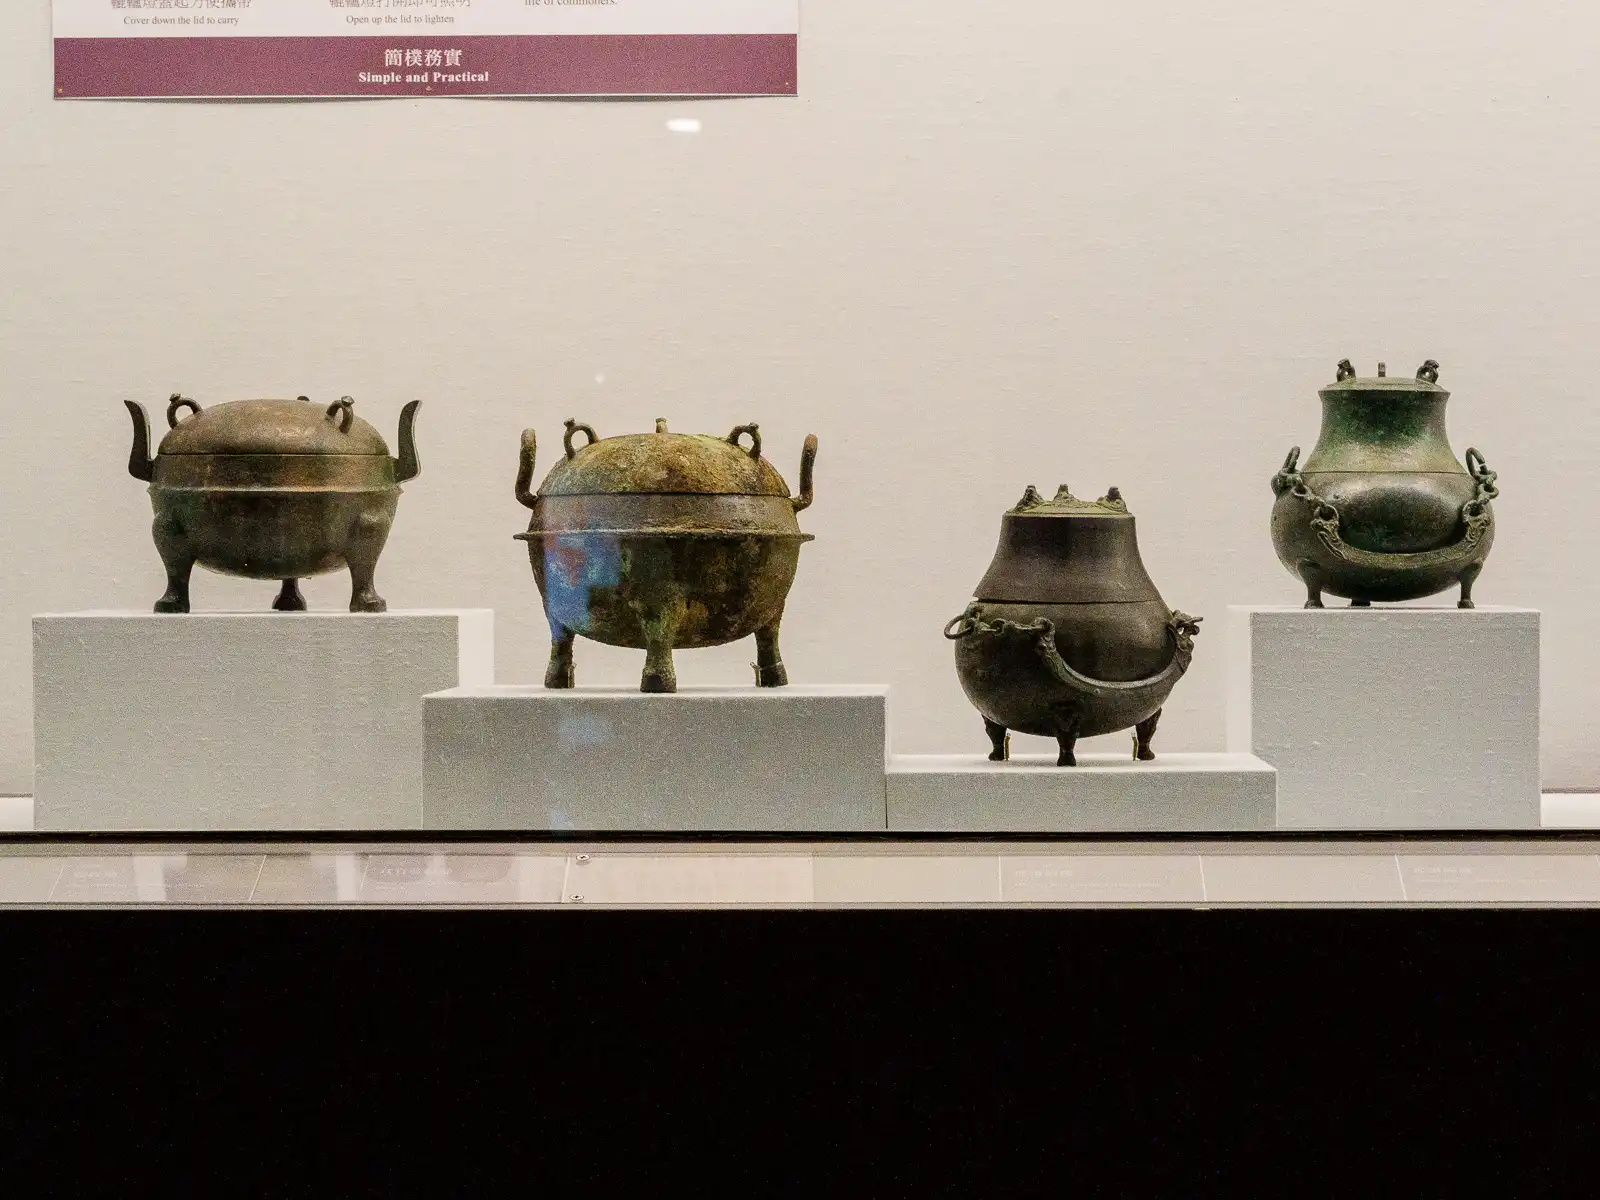 Four ancient metal pots are displayed on white pedestals against a white wall.